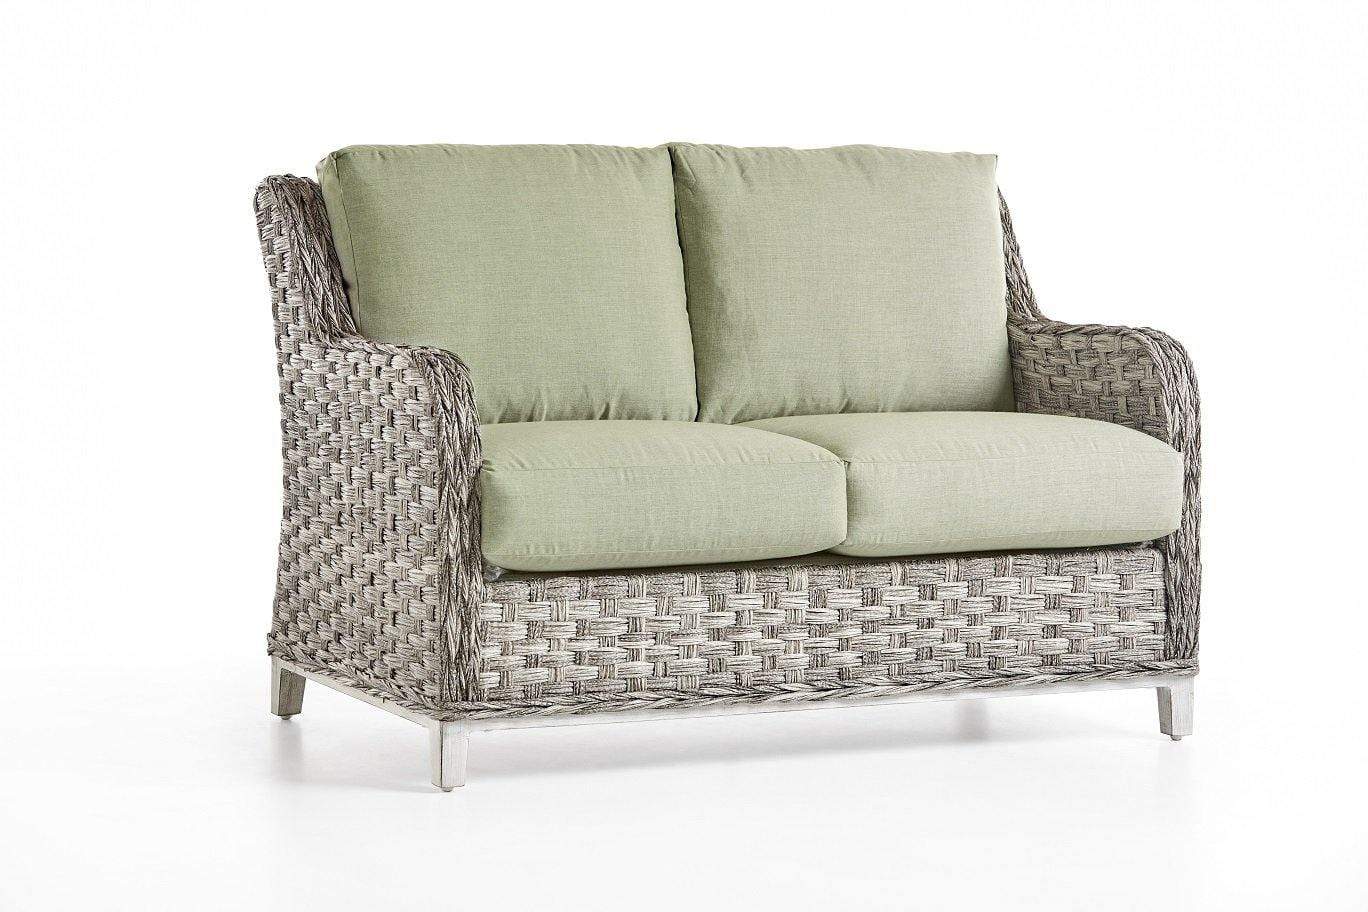 South Sea Outdoor Living Patio Furniture Grand Isle Loveseat by South Sea Outdoor Living - 77402